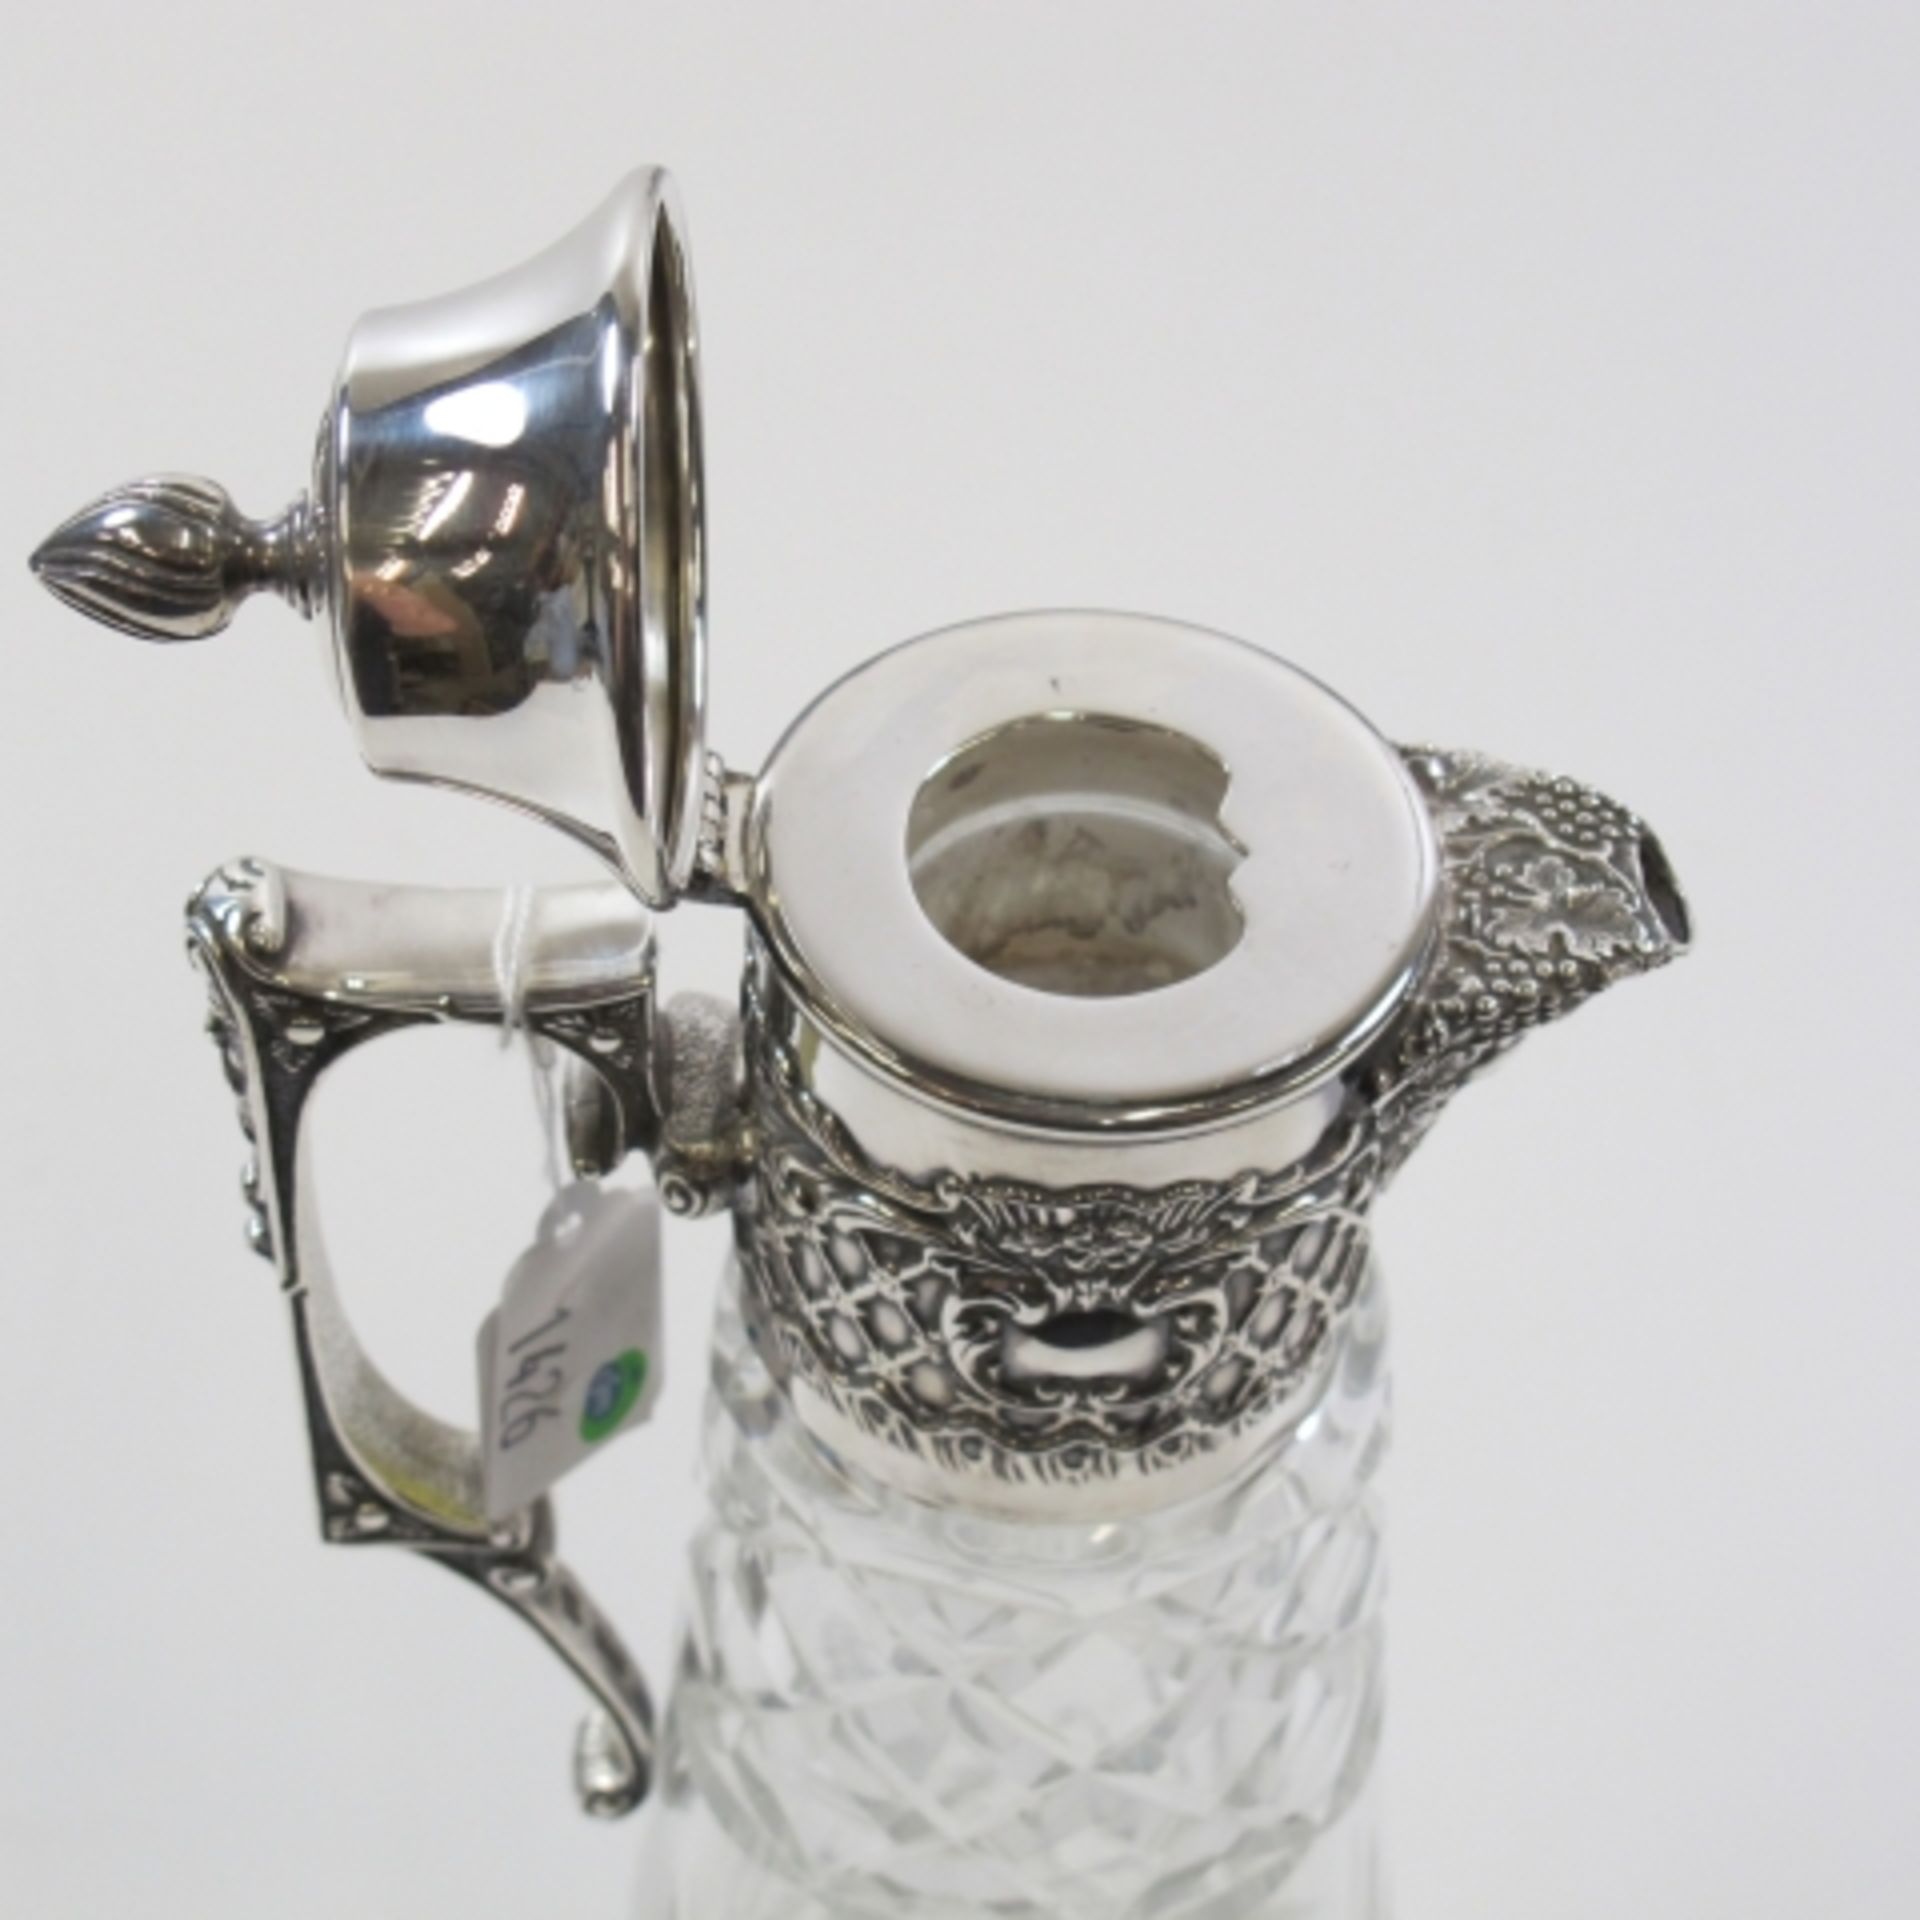 Silver Plate Mounted Cut Glass Claret Jug (est £40-£60) - Image 3 of 3